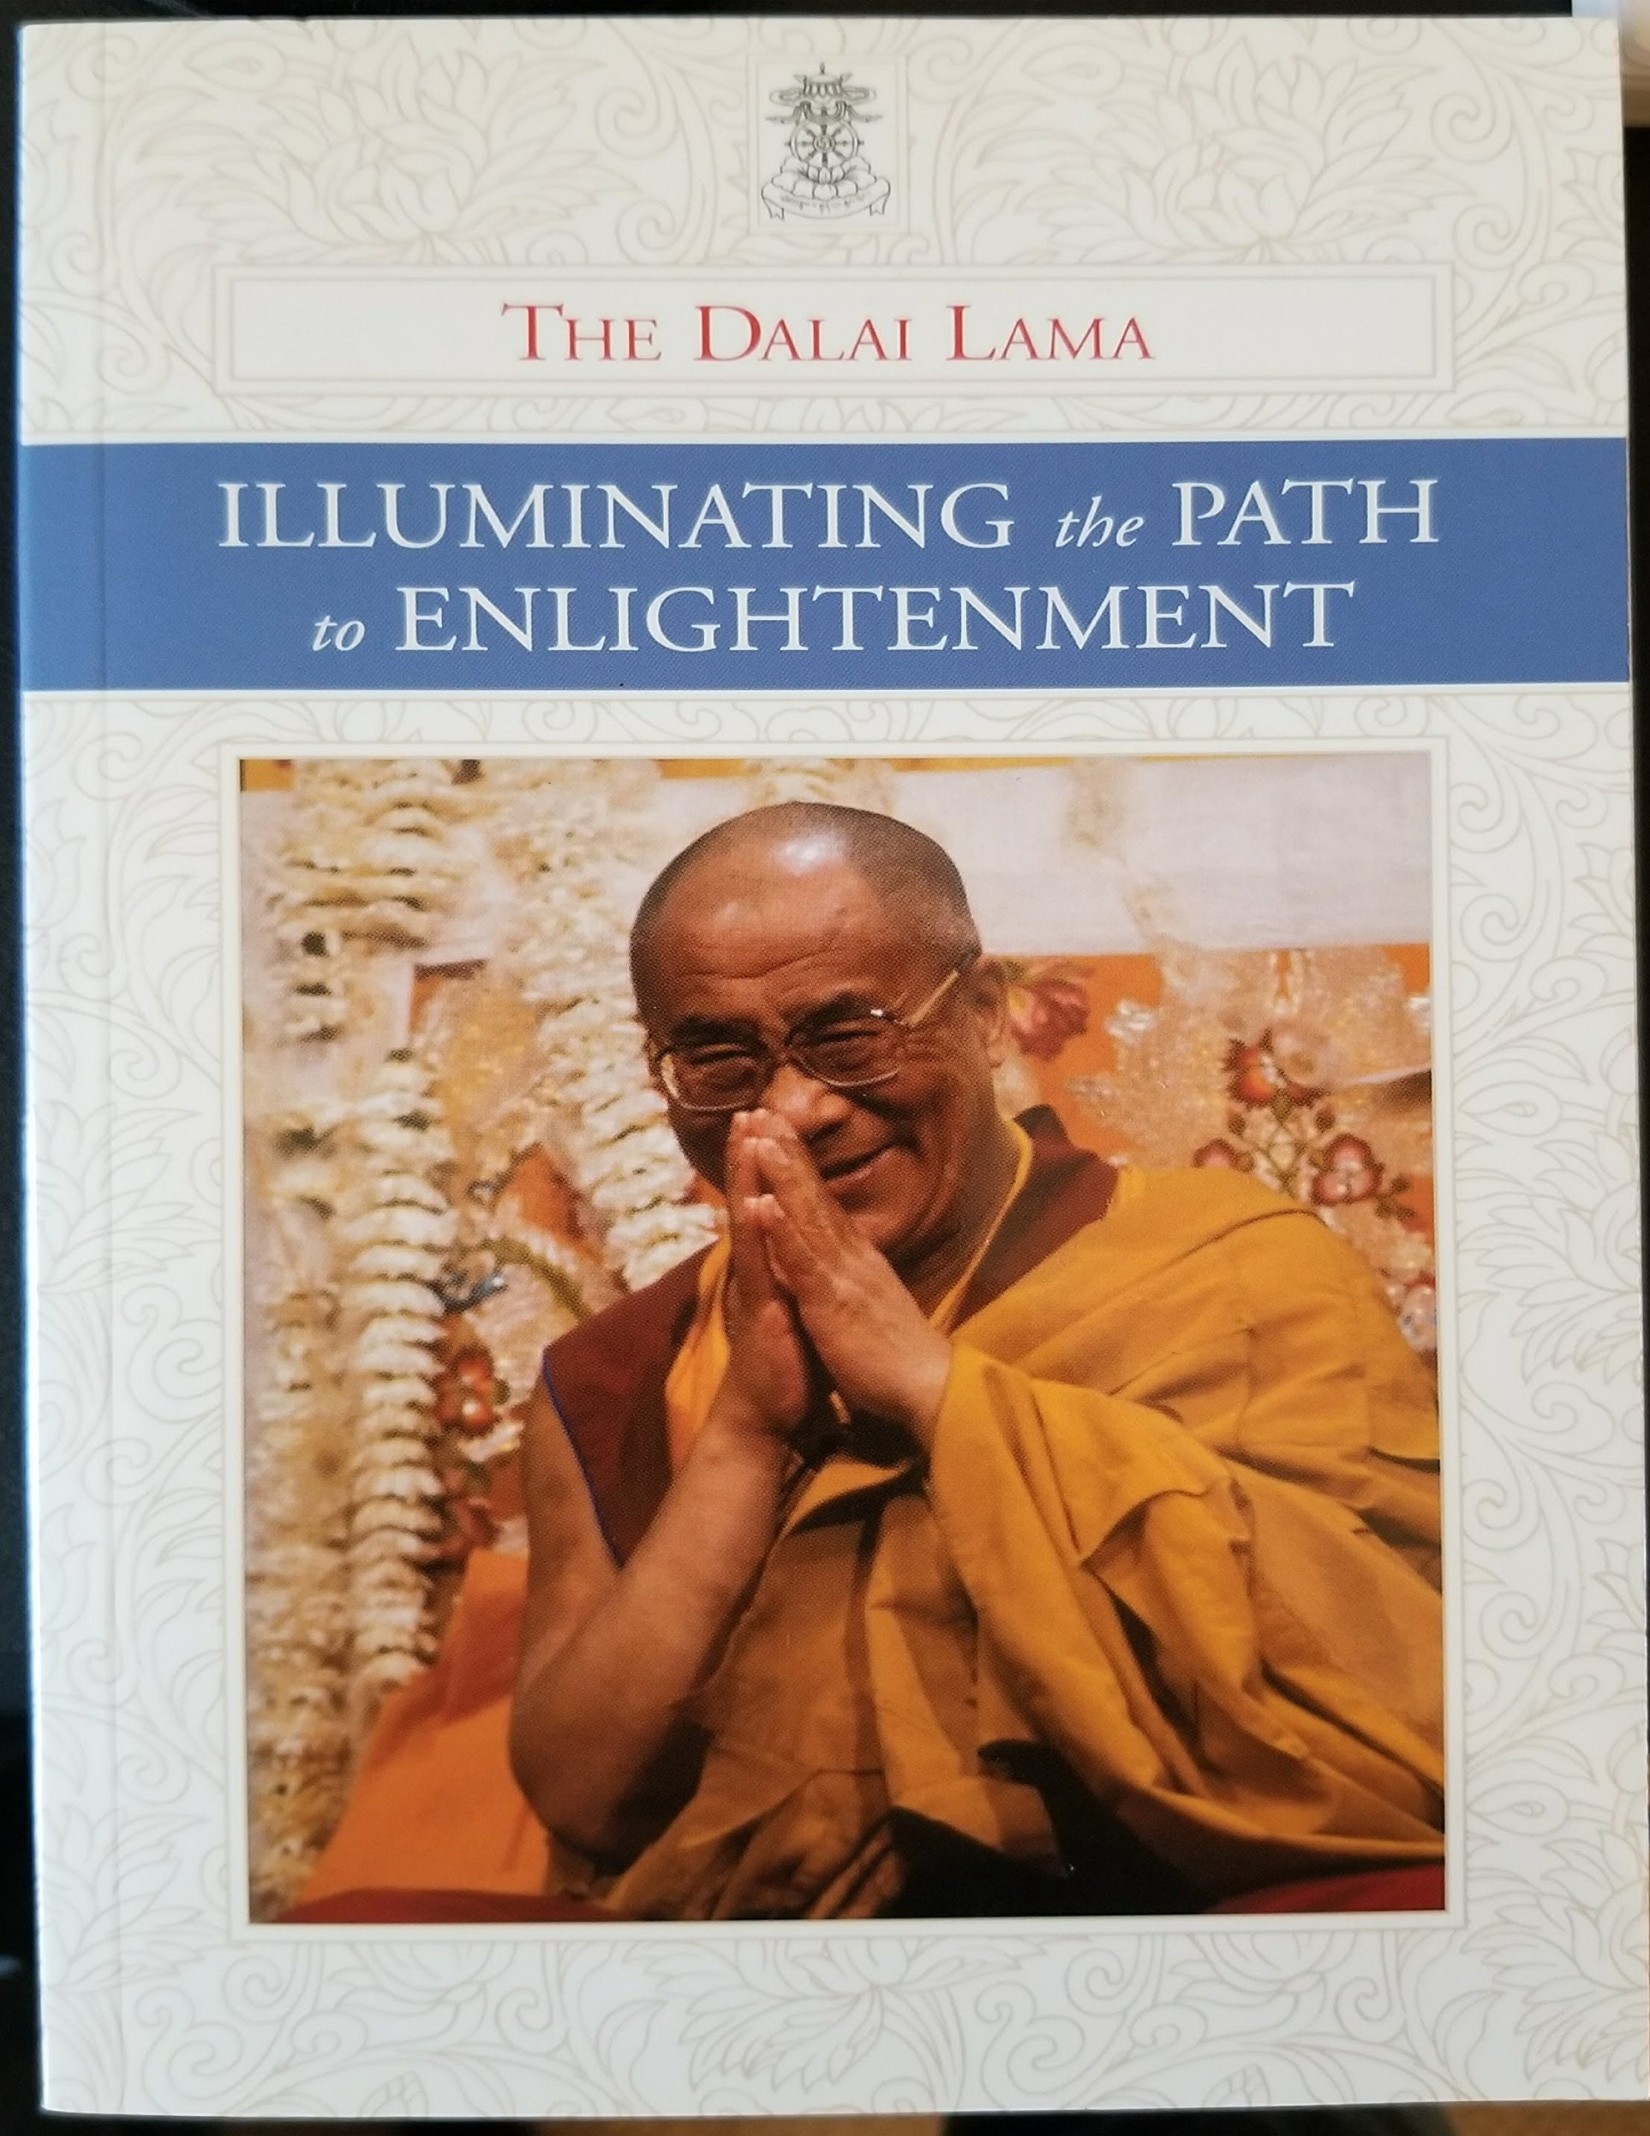 Illuminating the Path to Enlightenment